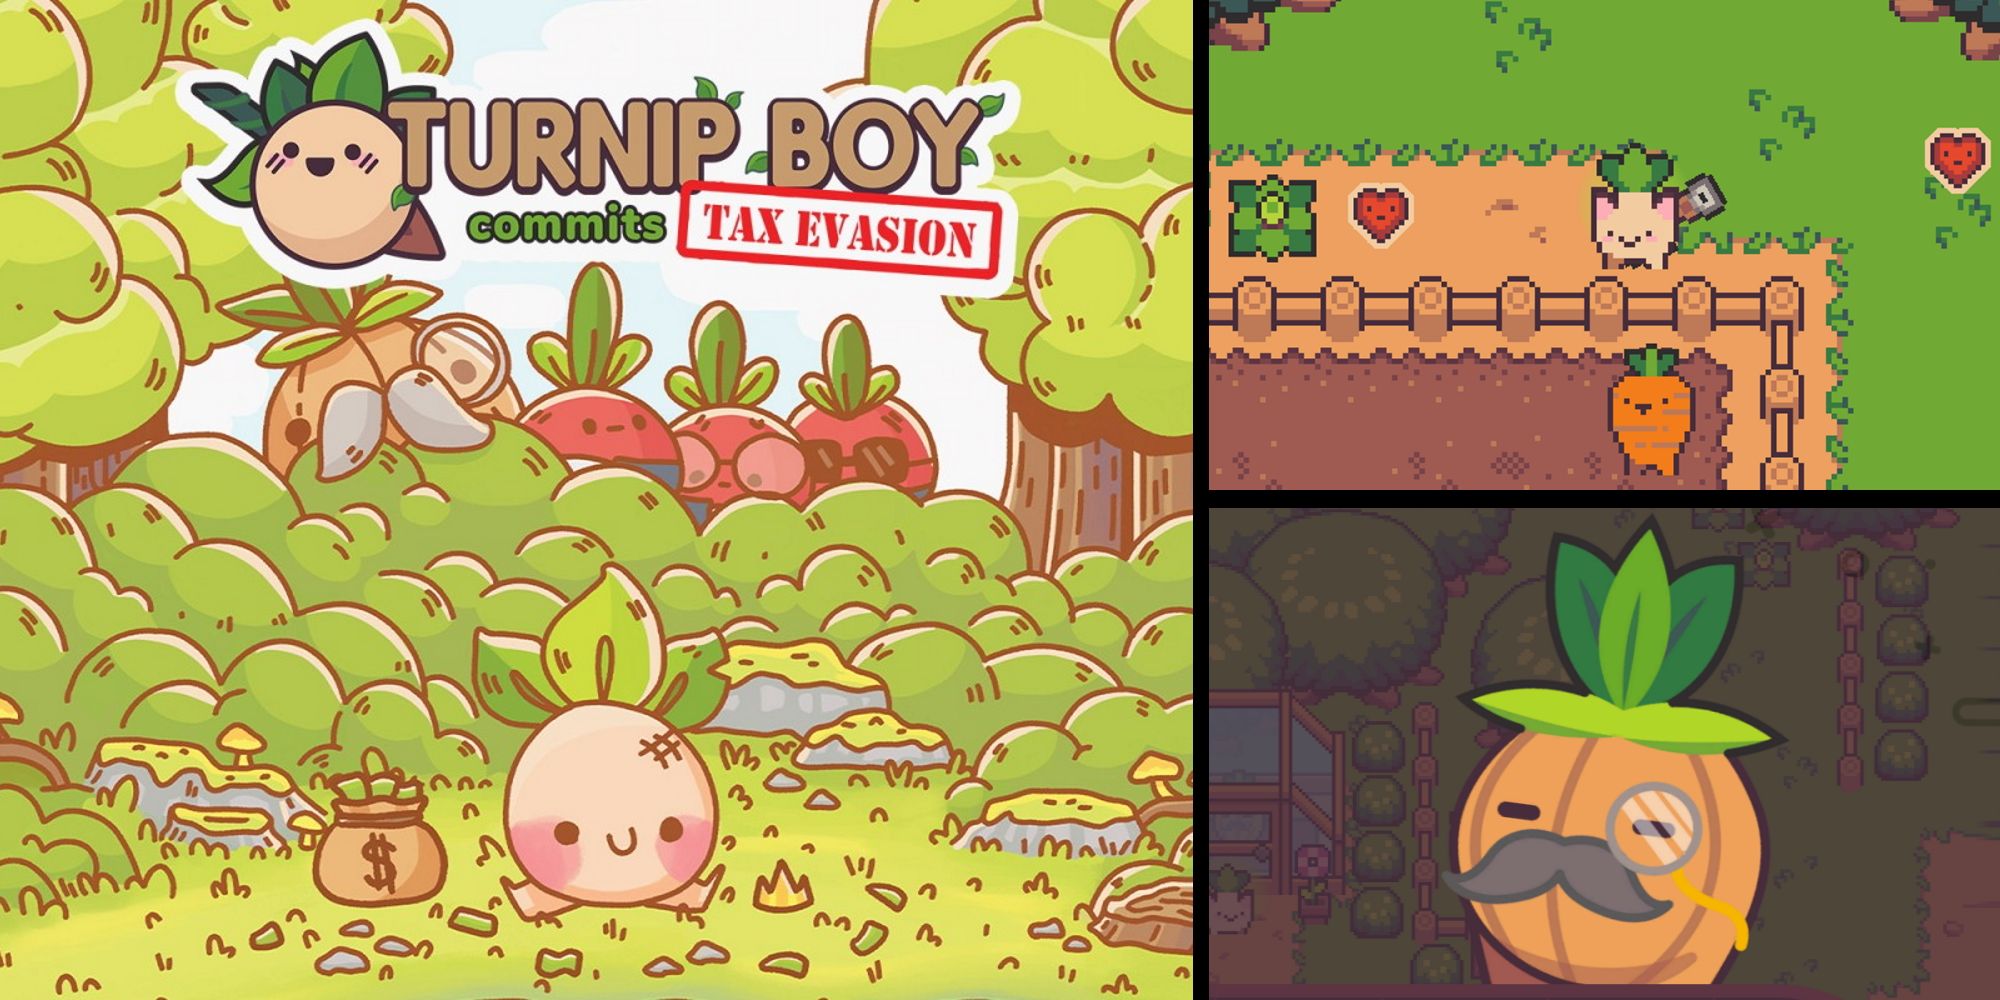 Turnip Boy Commits Tax Evasion Title Image, Gameplay Capture, and Mayor Onion